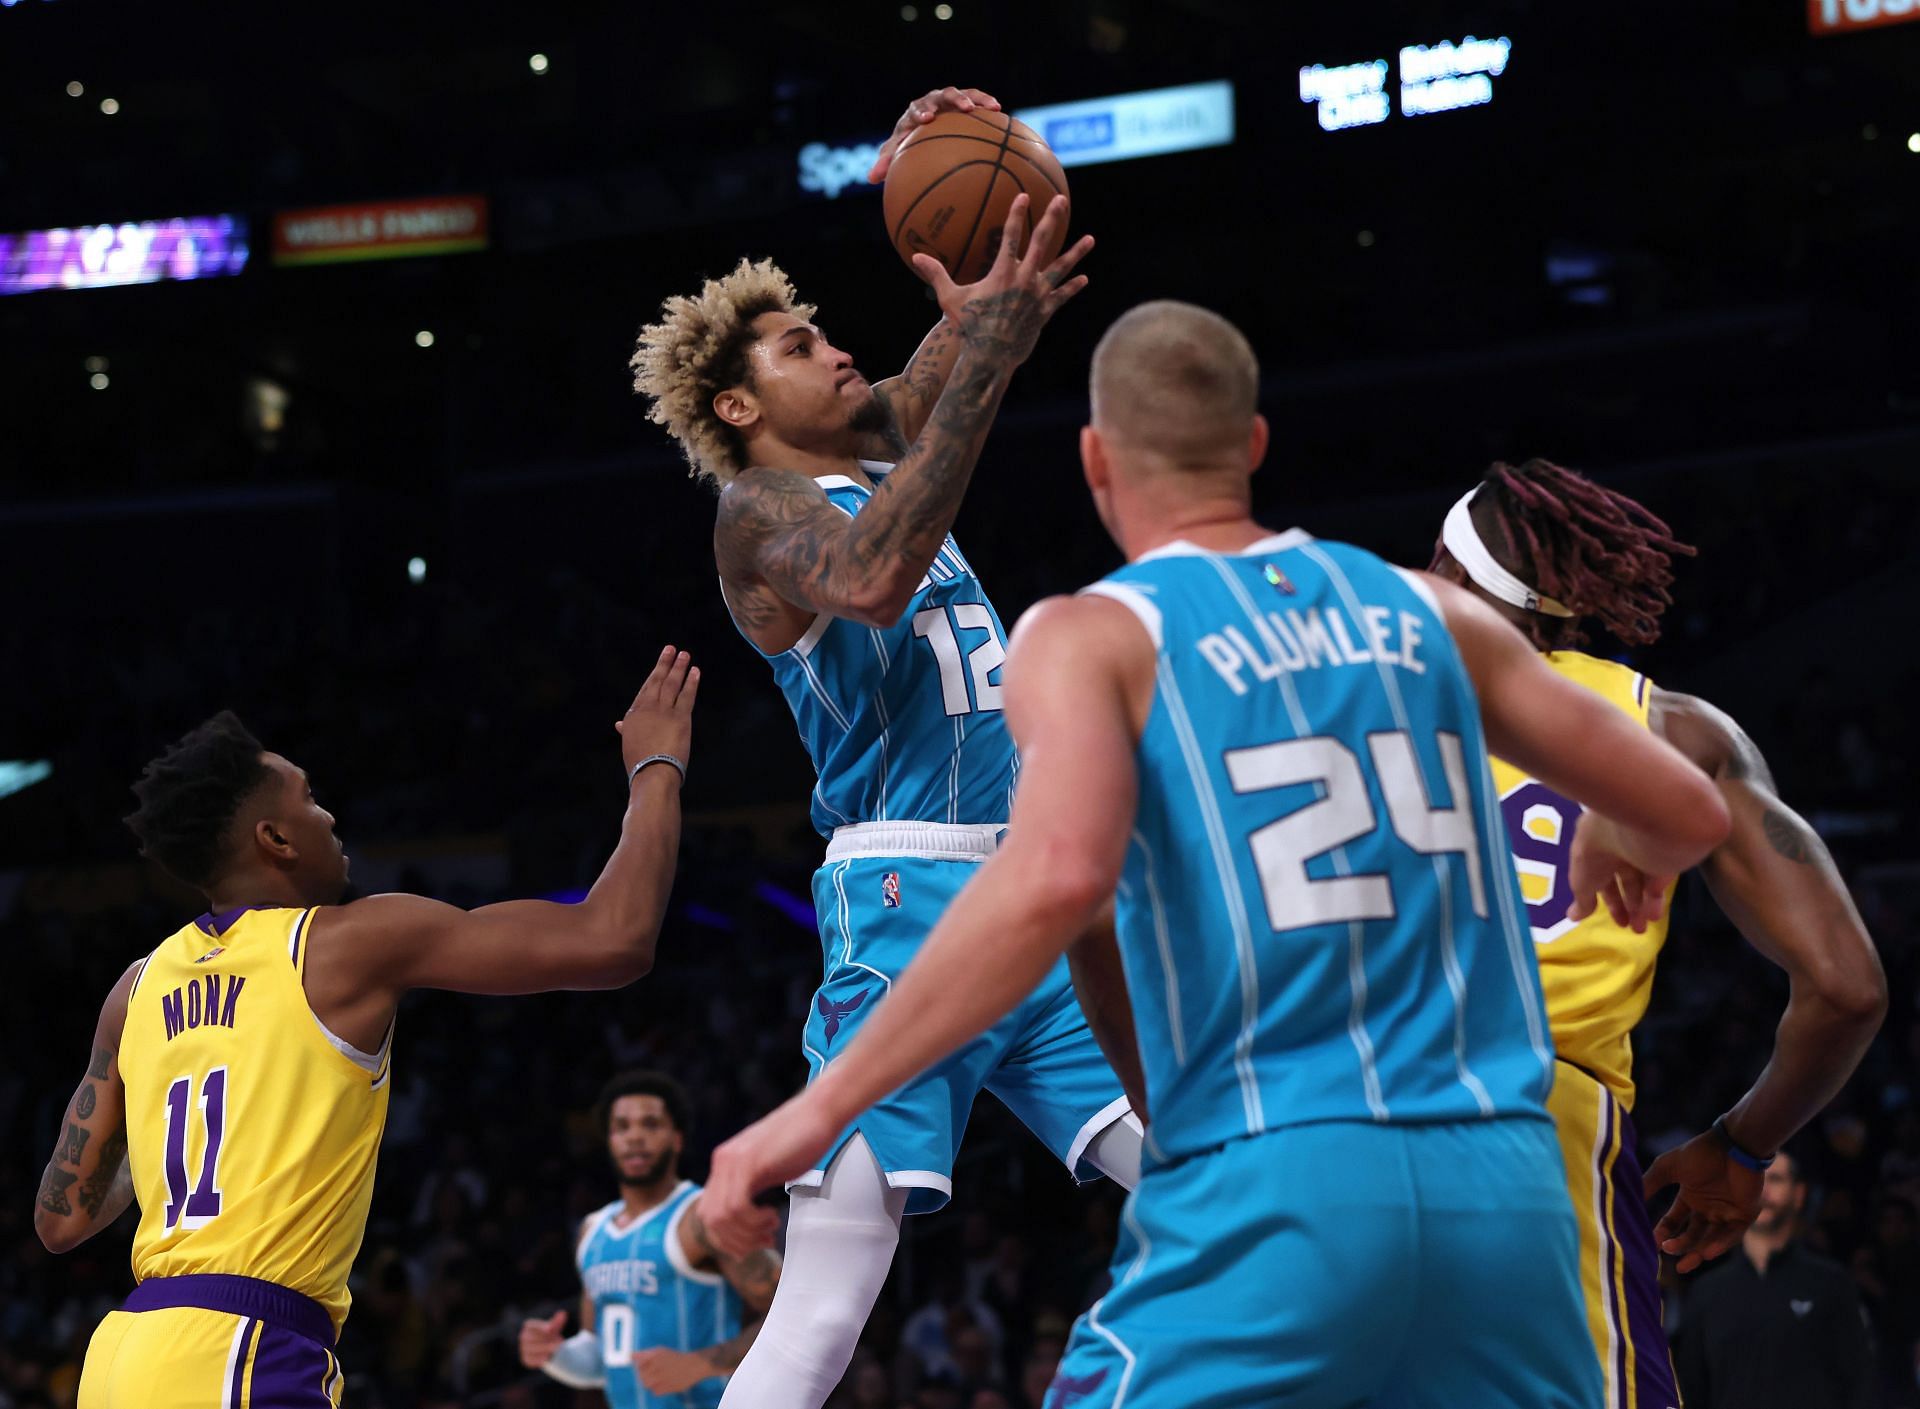 Kelly Oubre Jr. and Mason Plumlee of the Charlotte Hornets at Staples Center